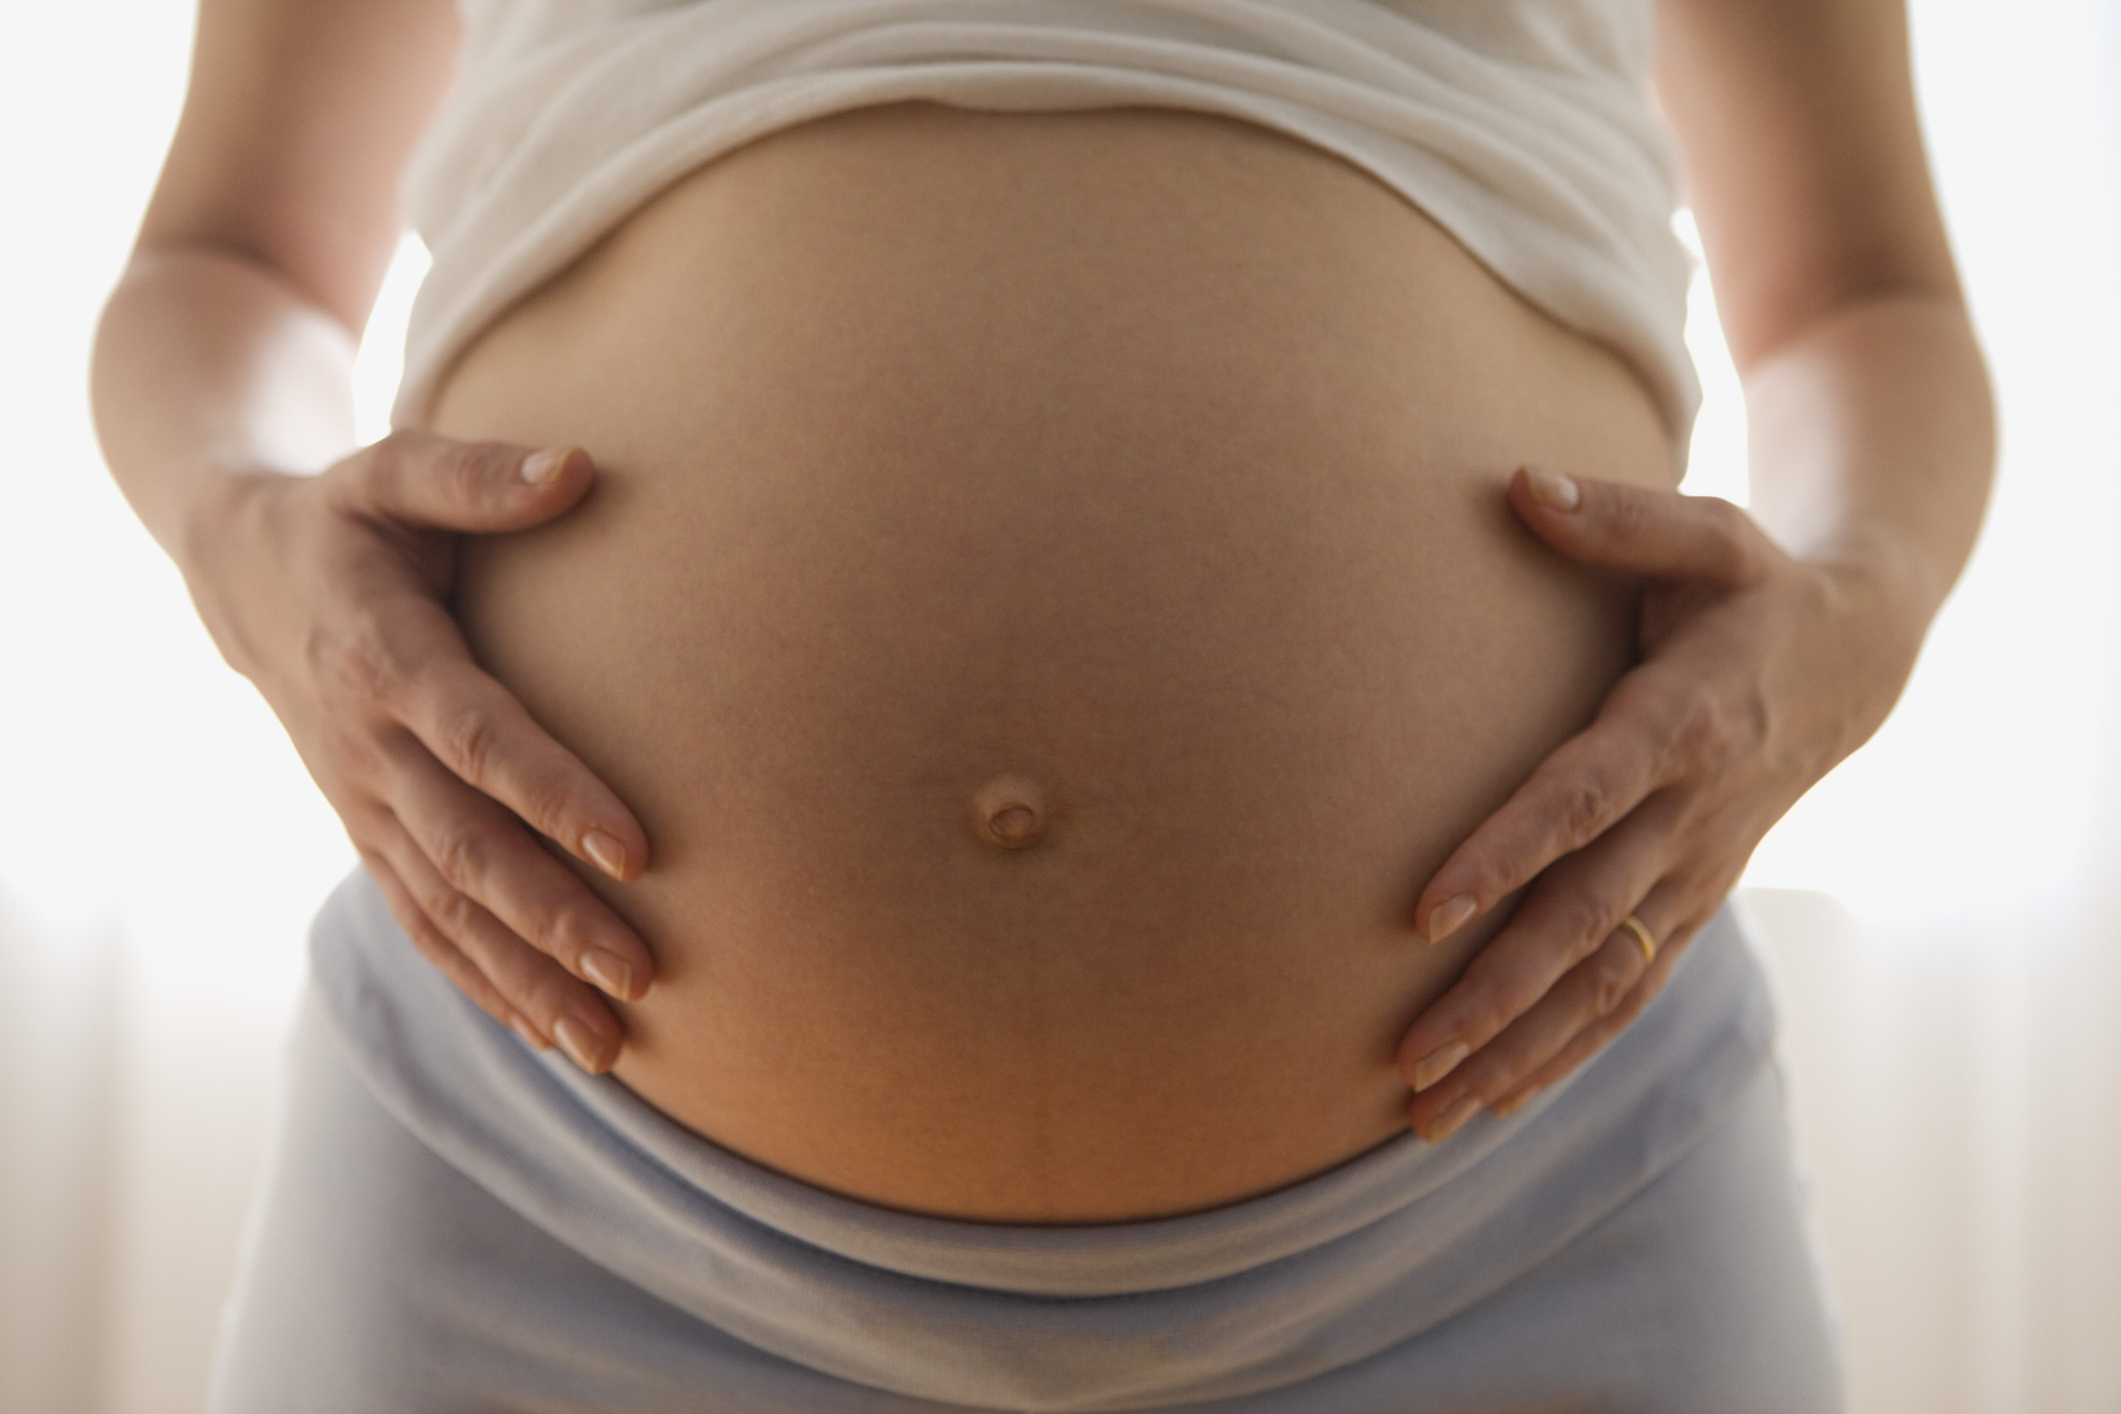 Pregnant person cradling their belly, focus on the midsection. Article context: parenting